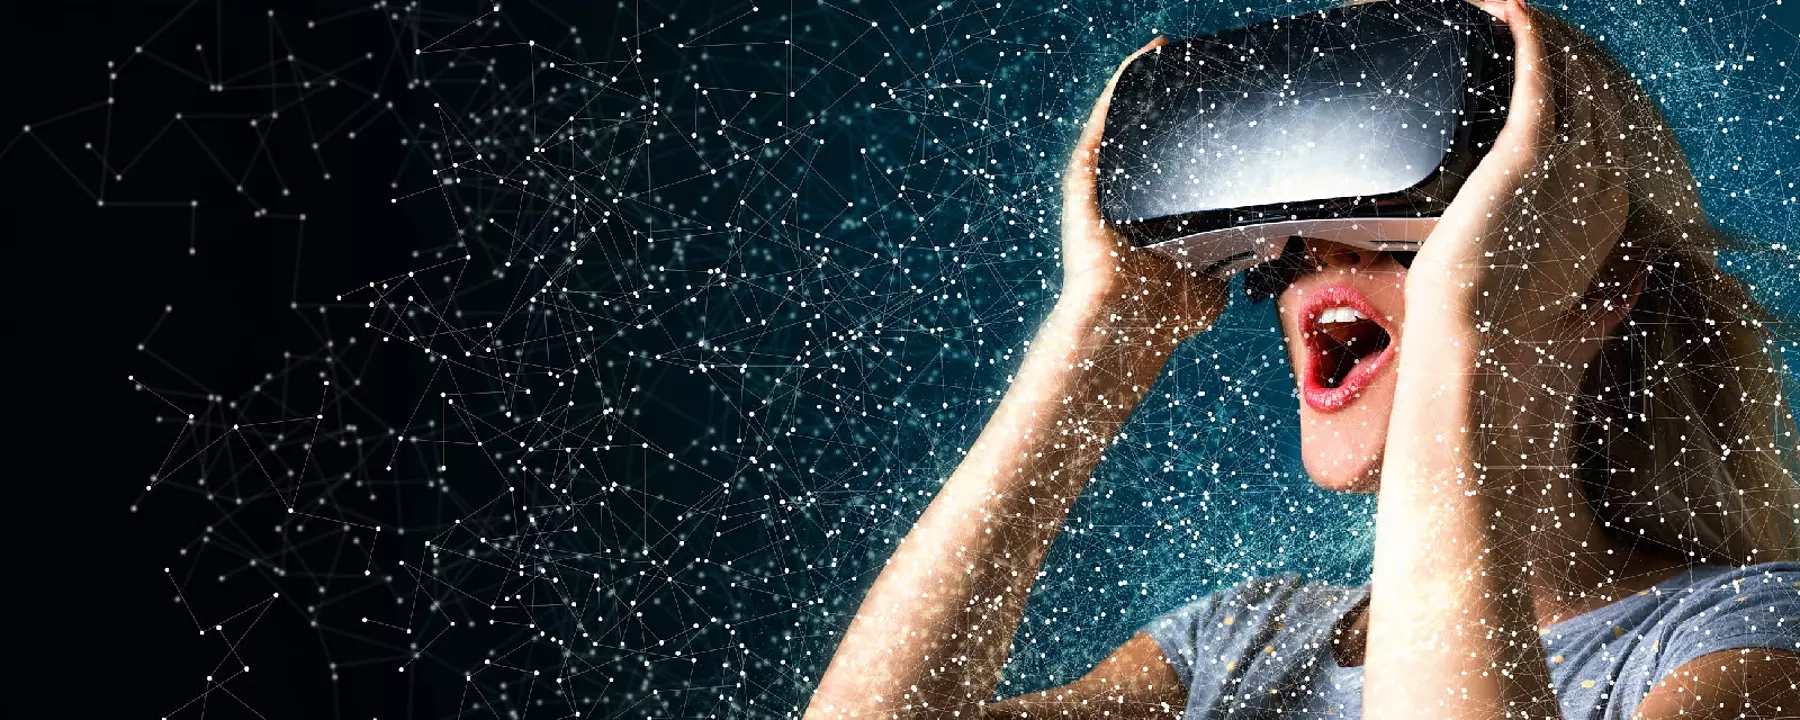 Illustration of a woman wearing virtual reality goggles and marveling at a scene of digital stars.